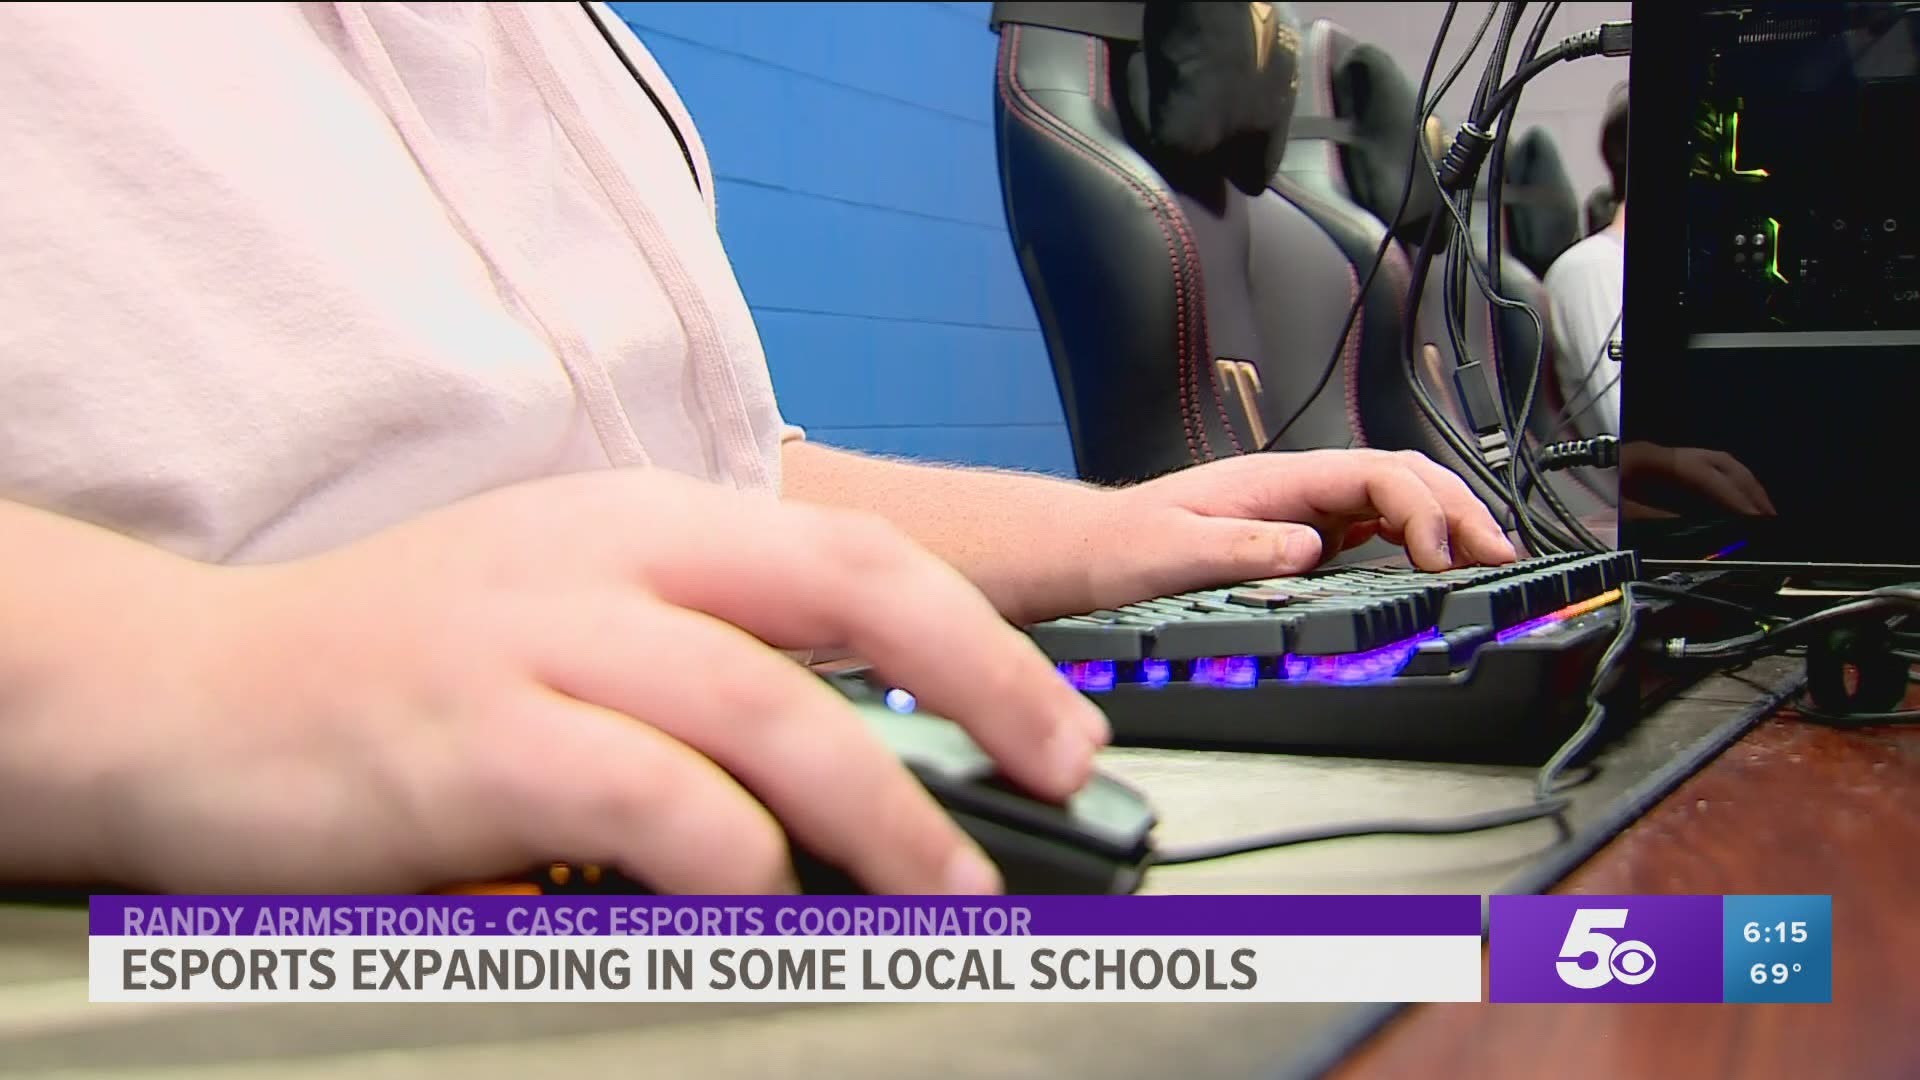 Gentry Public Schools now has an Esports league, Carl Albert State College built a new arena for Esports. https://bit.ly/32tkzMs